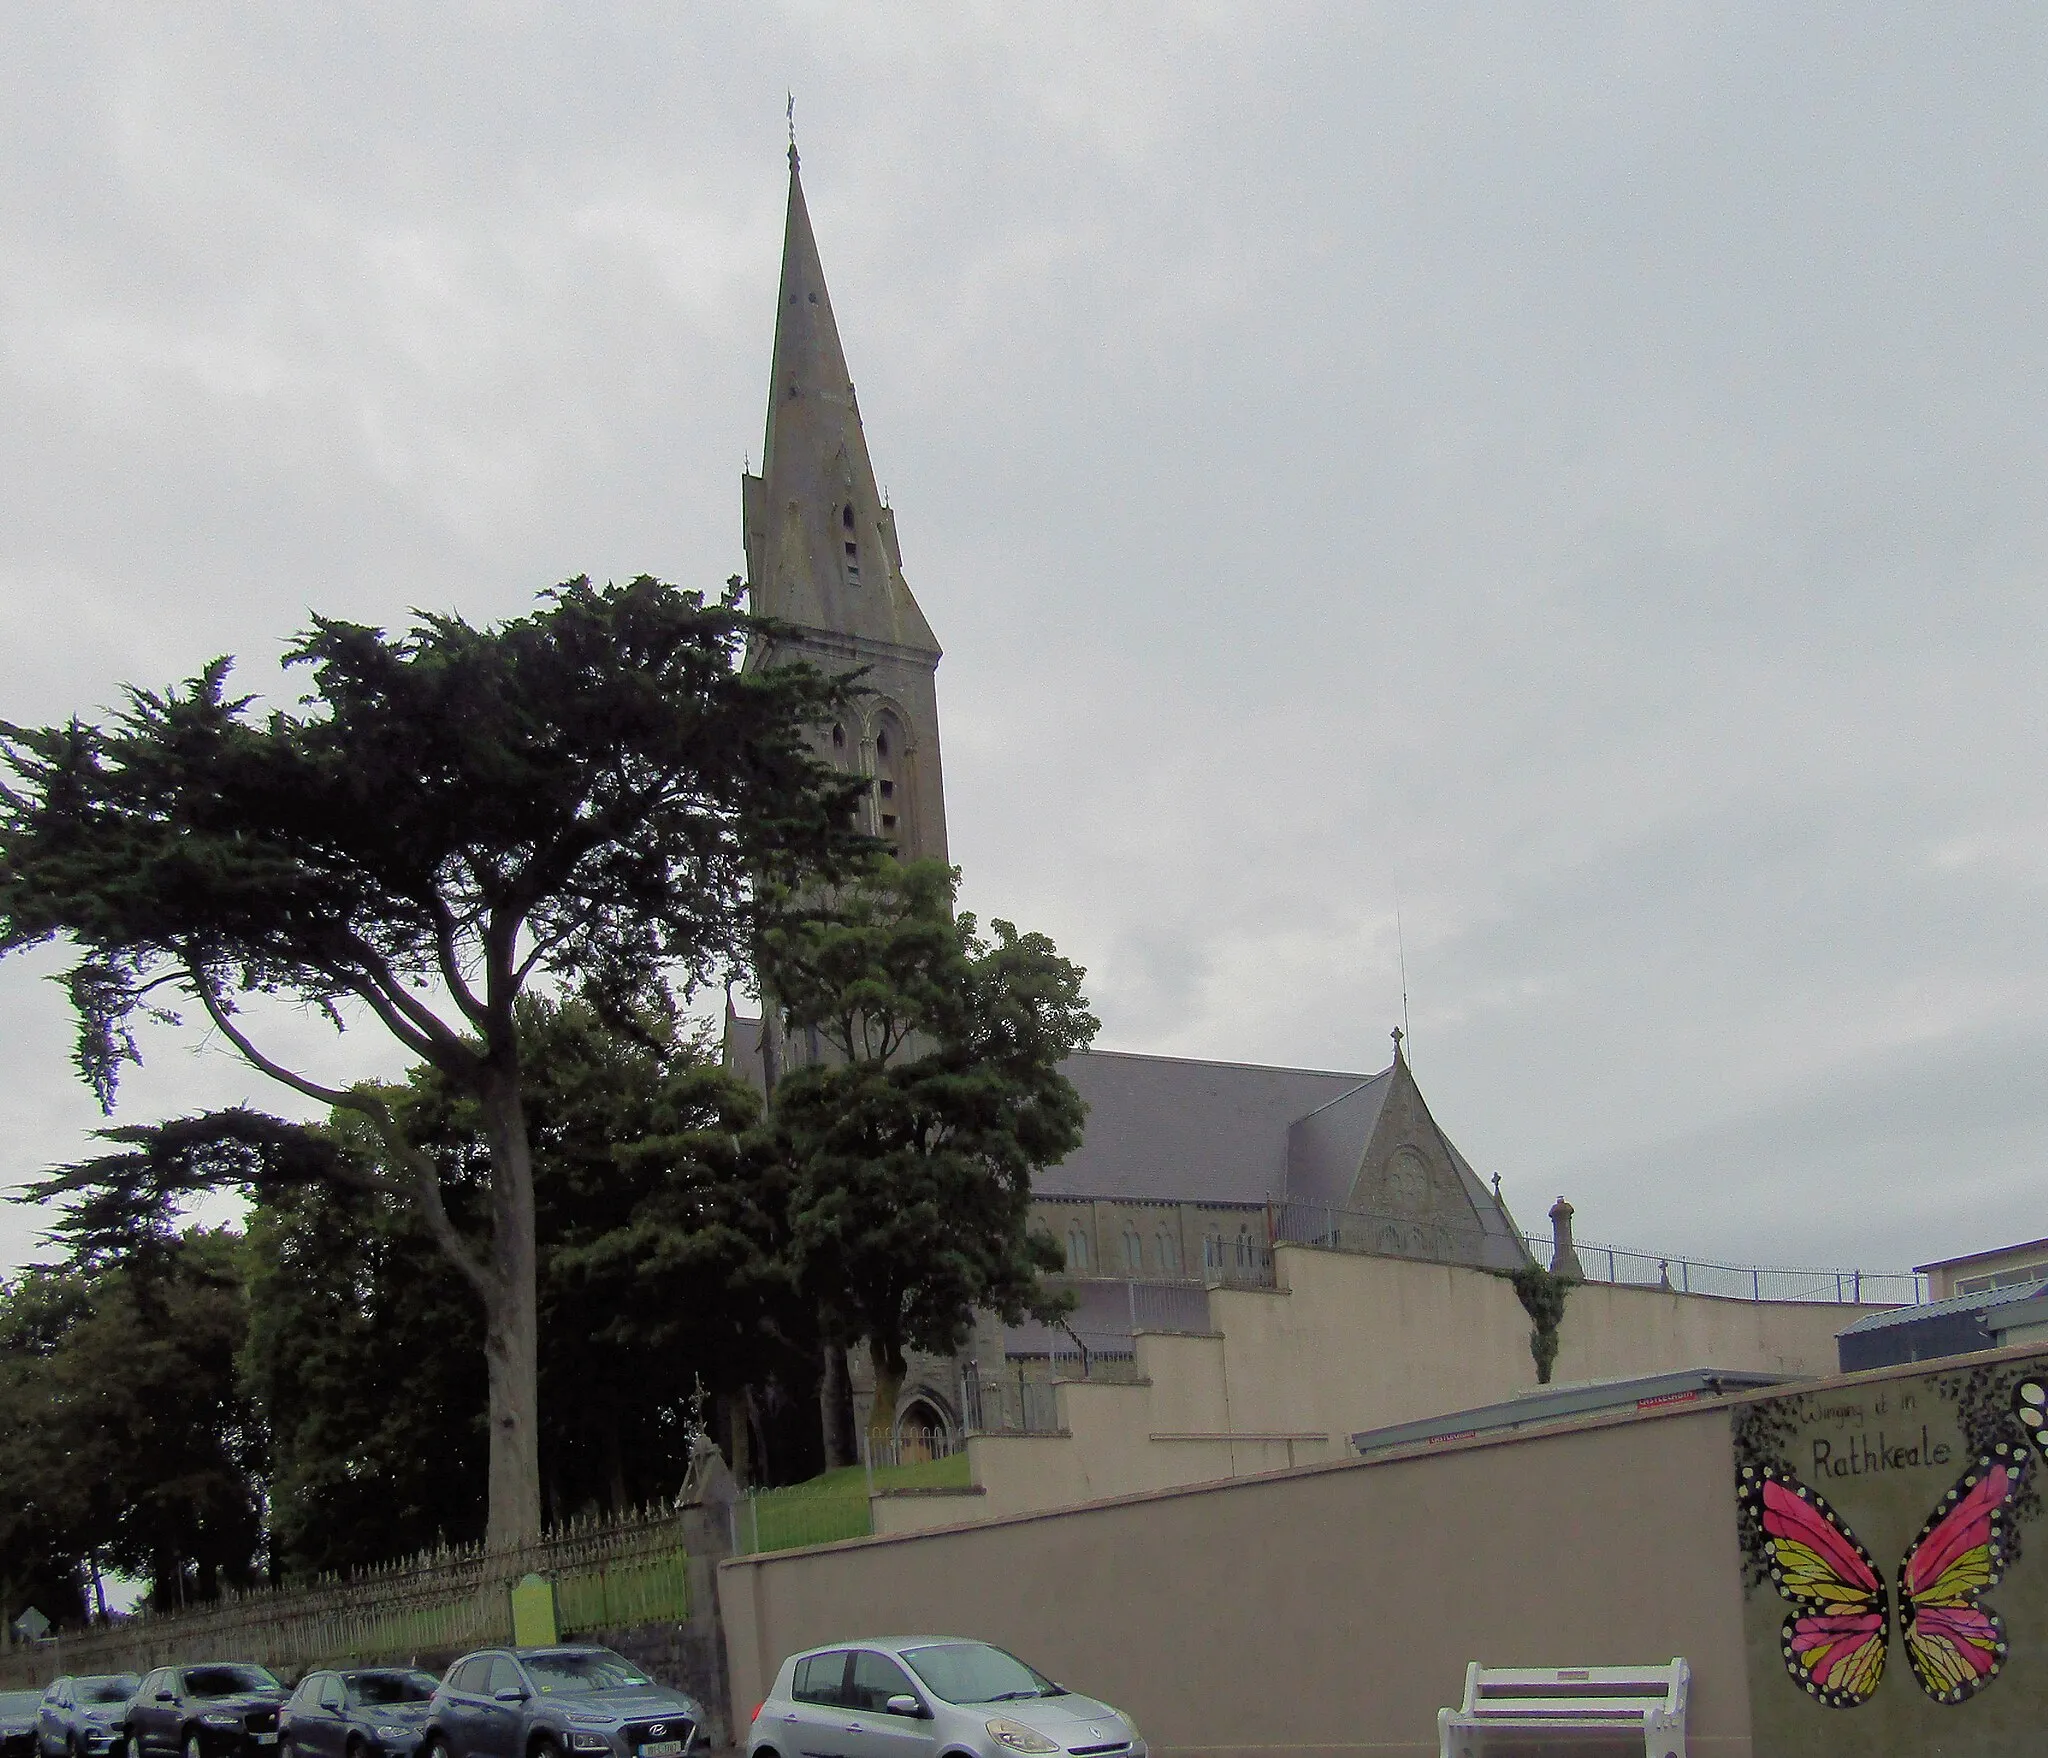 Photo showing: Saint Mary's Catholic Church in Rathkeale